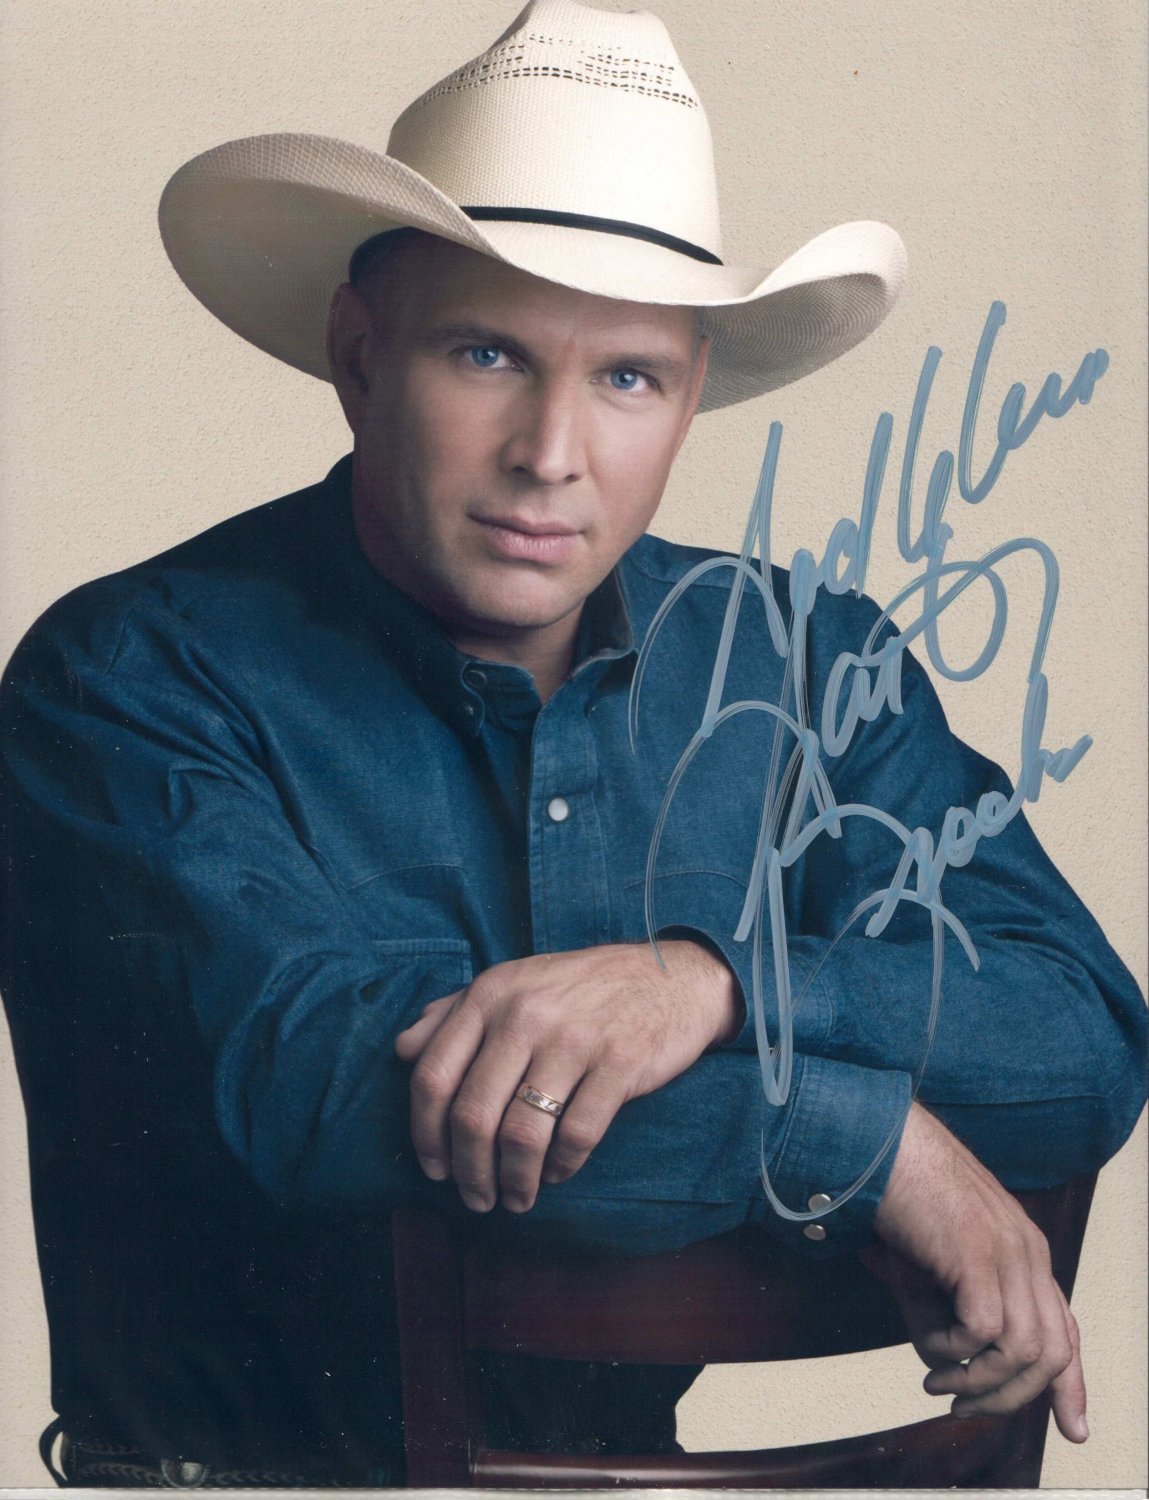 GARTH BROOKS - COUNTRY STAR - VERY YOUNG - HAND SIGNED AUTOGRAPHED PHOTO WITH COA